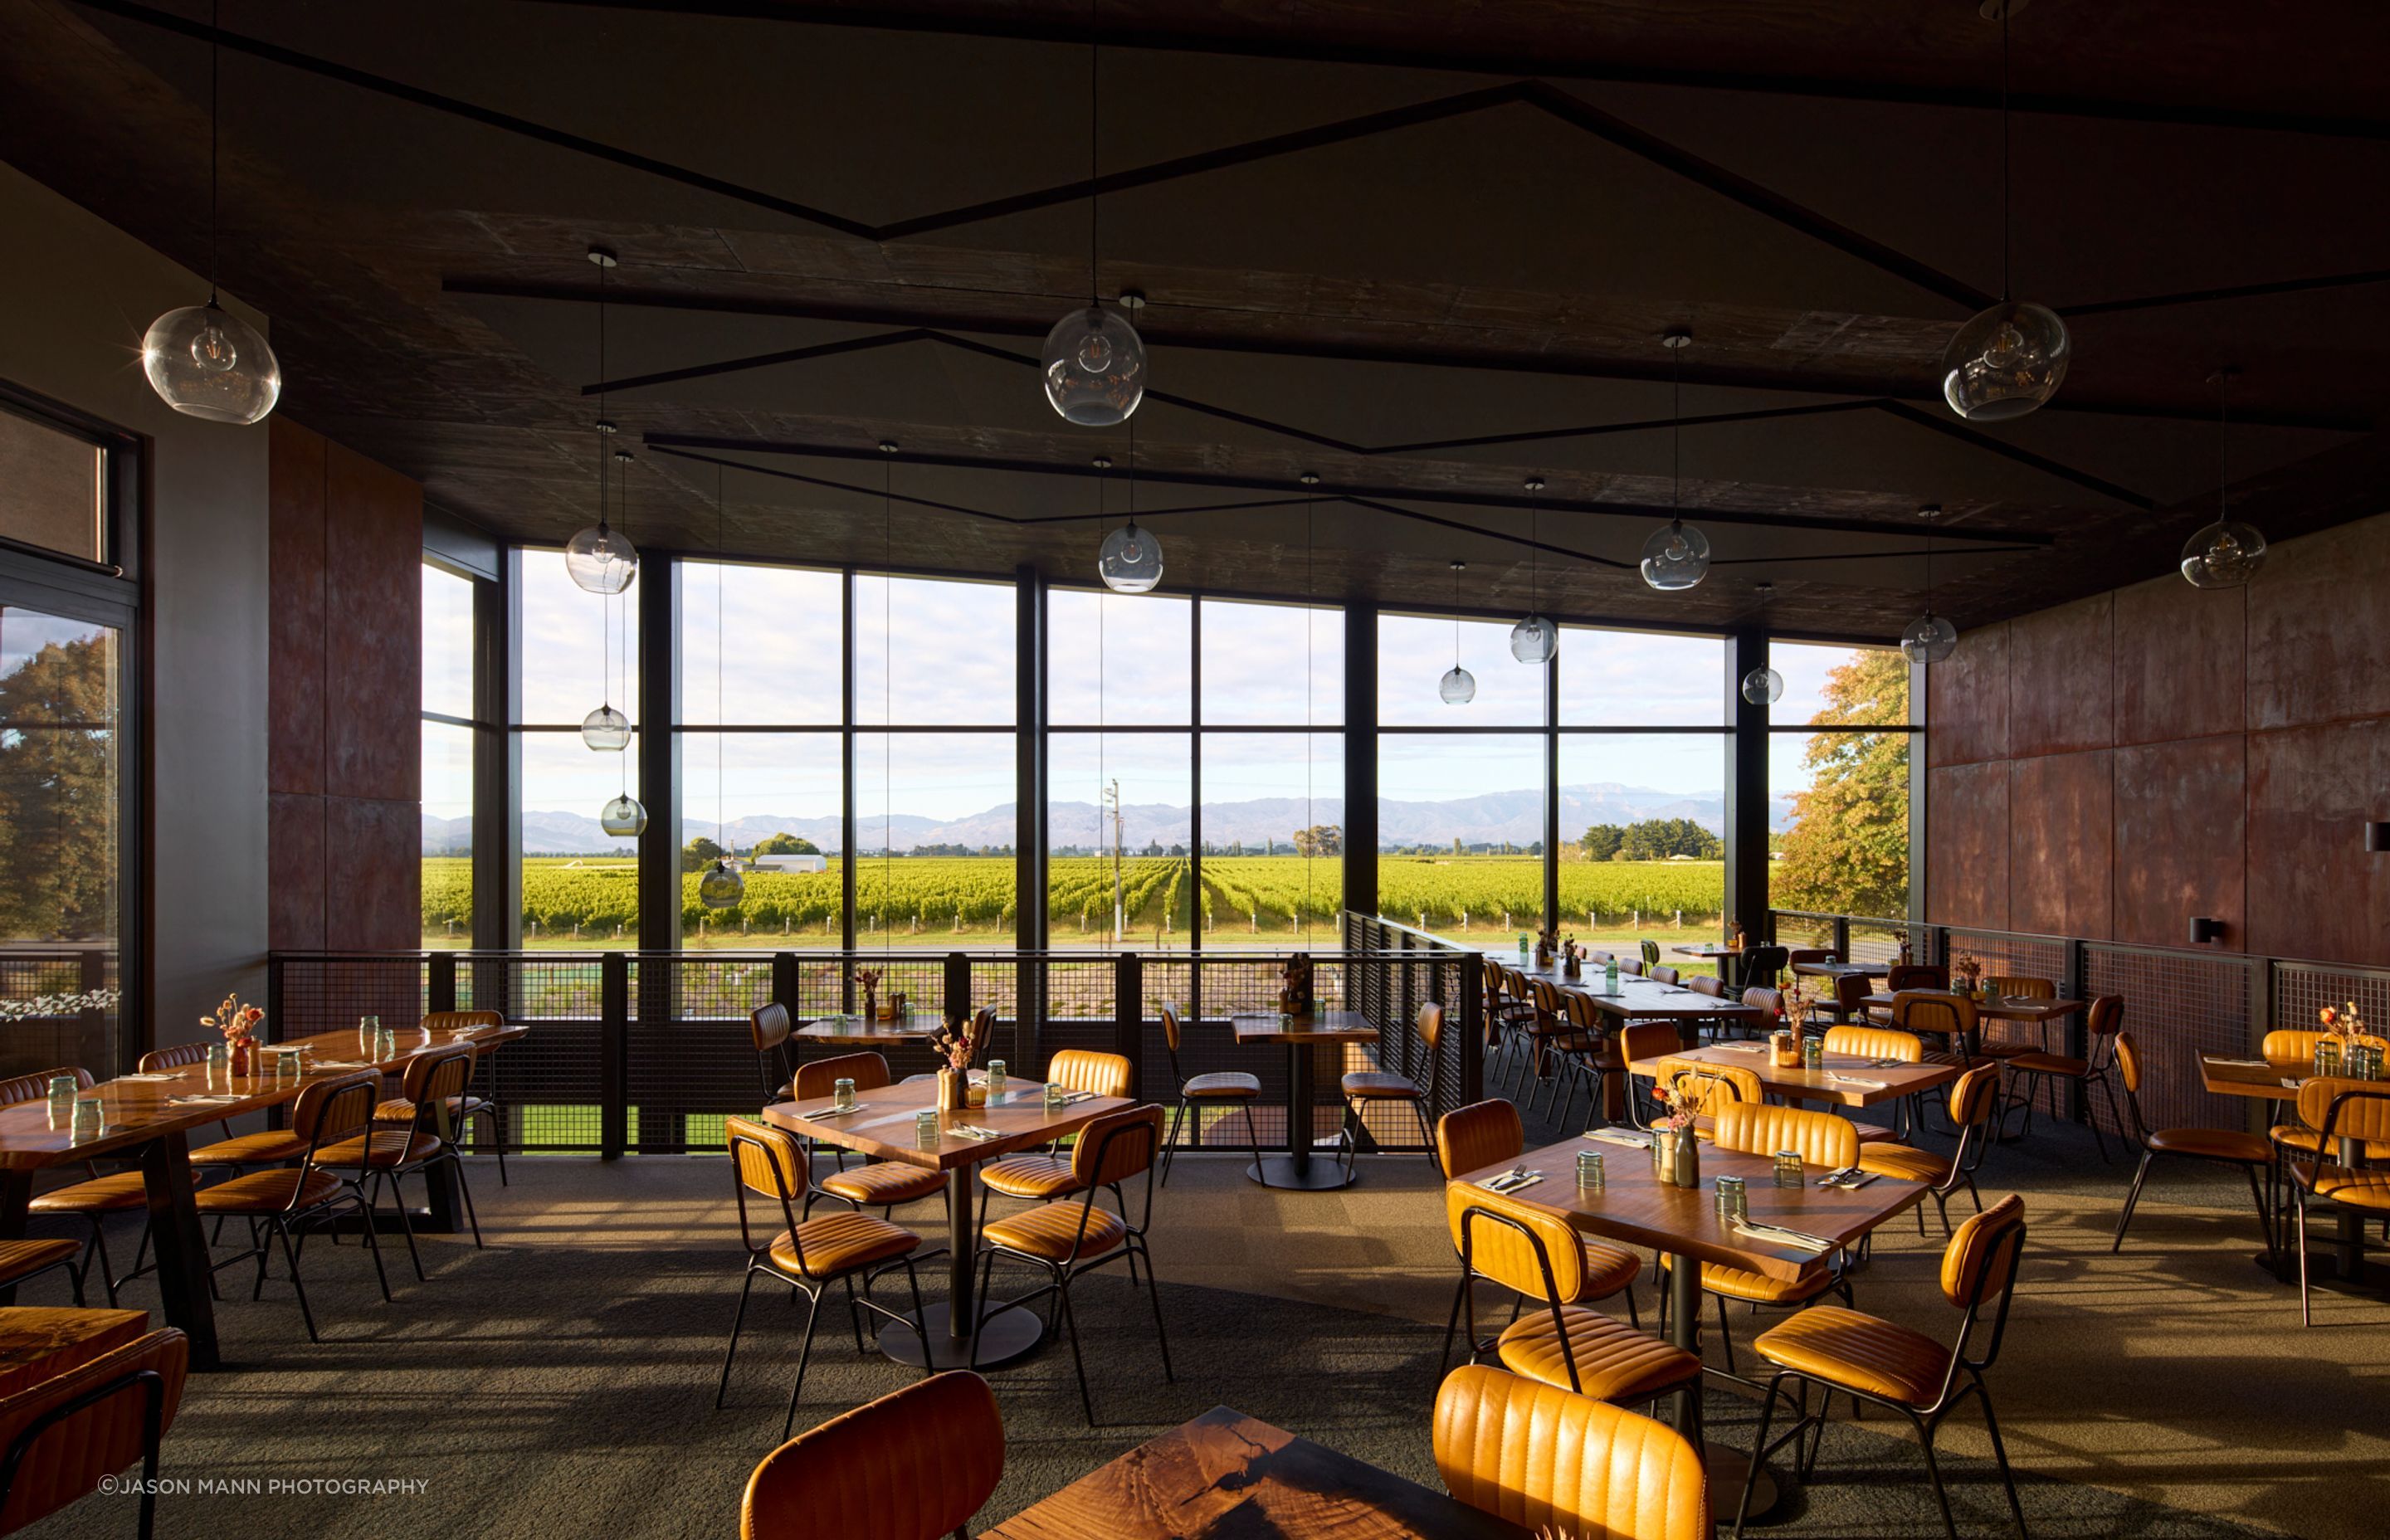 A sizeable mezzanine dining space enjoys panoramic views across the valley and into the bar below.